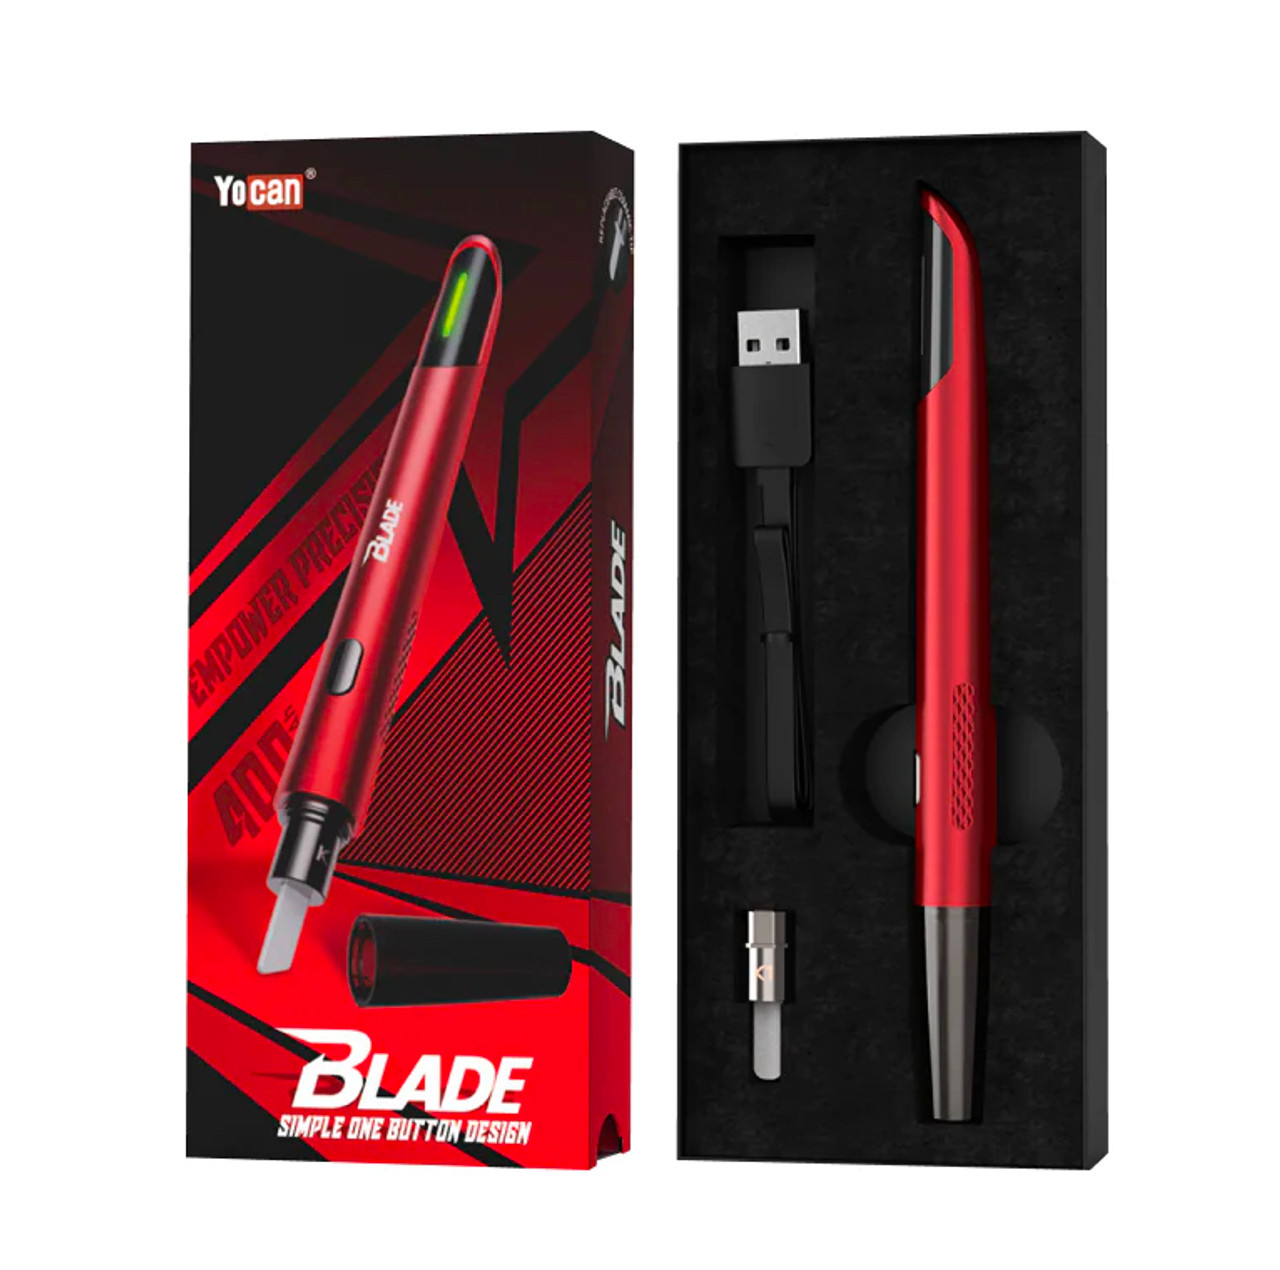 Yocan Hot Knife Electric Dab Tool and Dab Thermometer: Jaws Silver